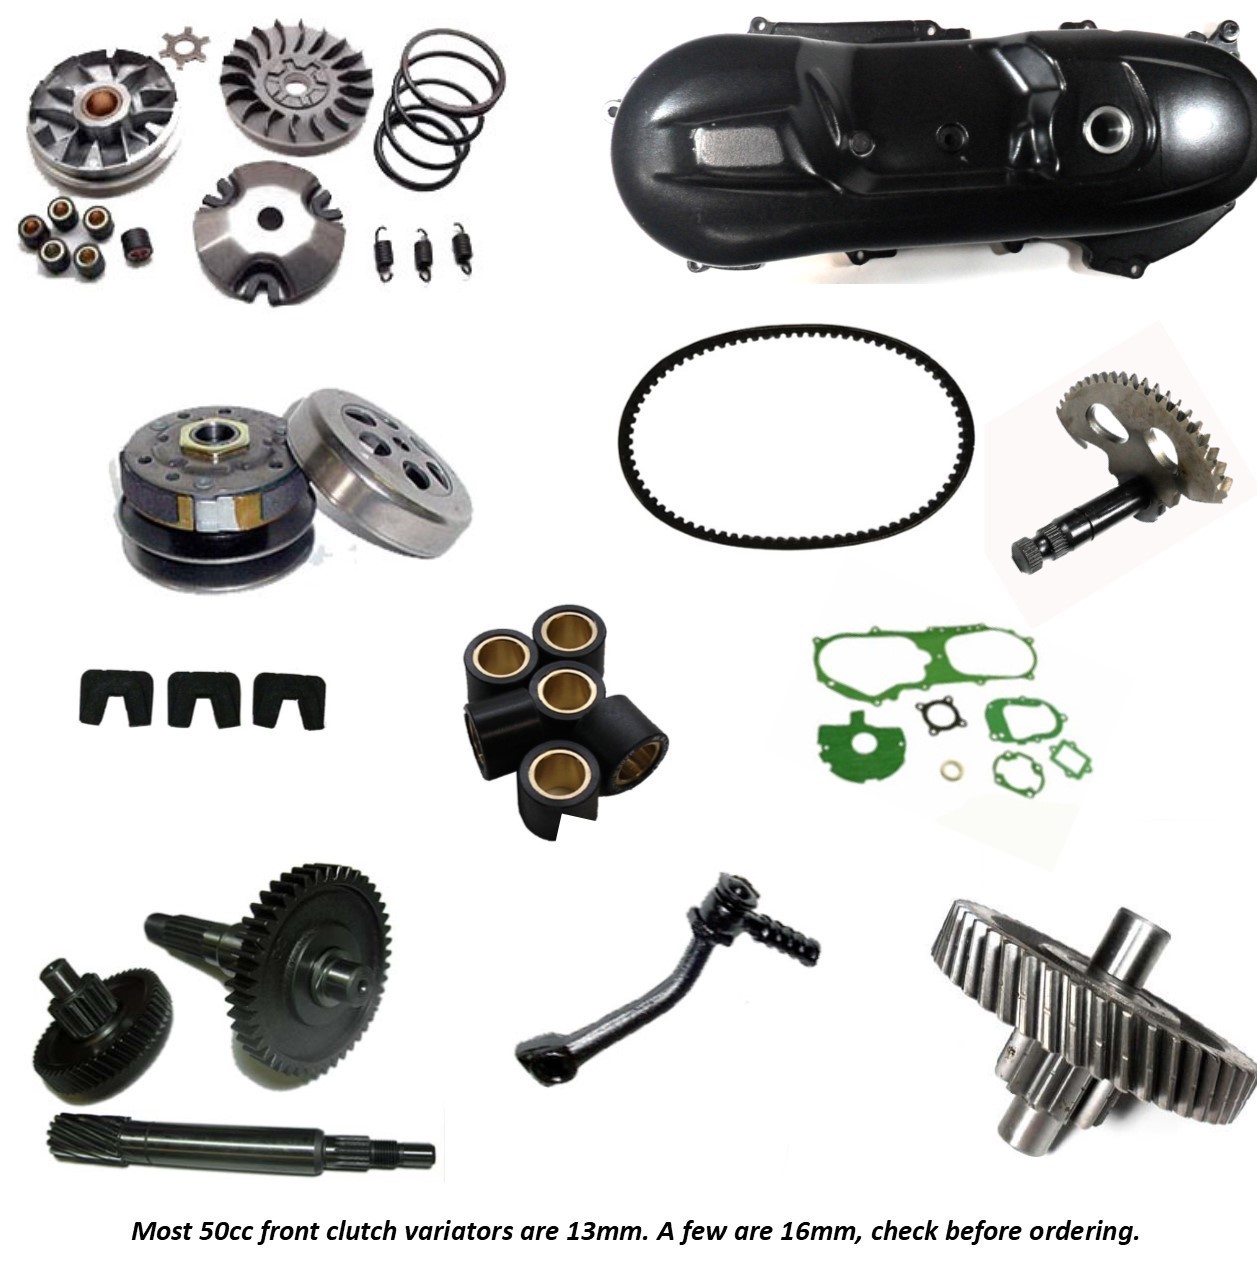 To See More Transmission Parts Click Here